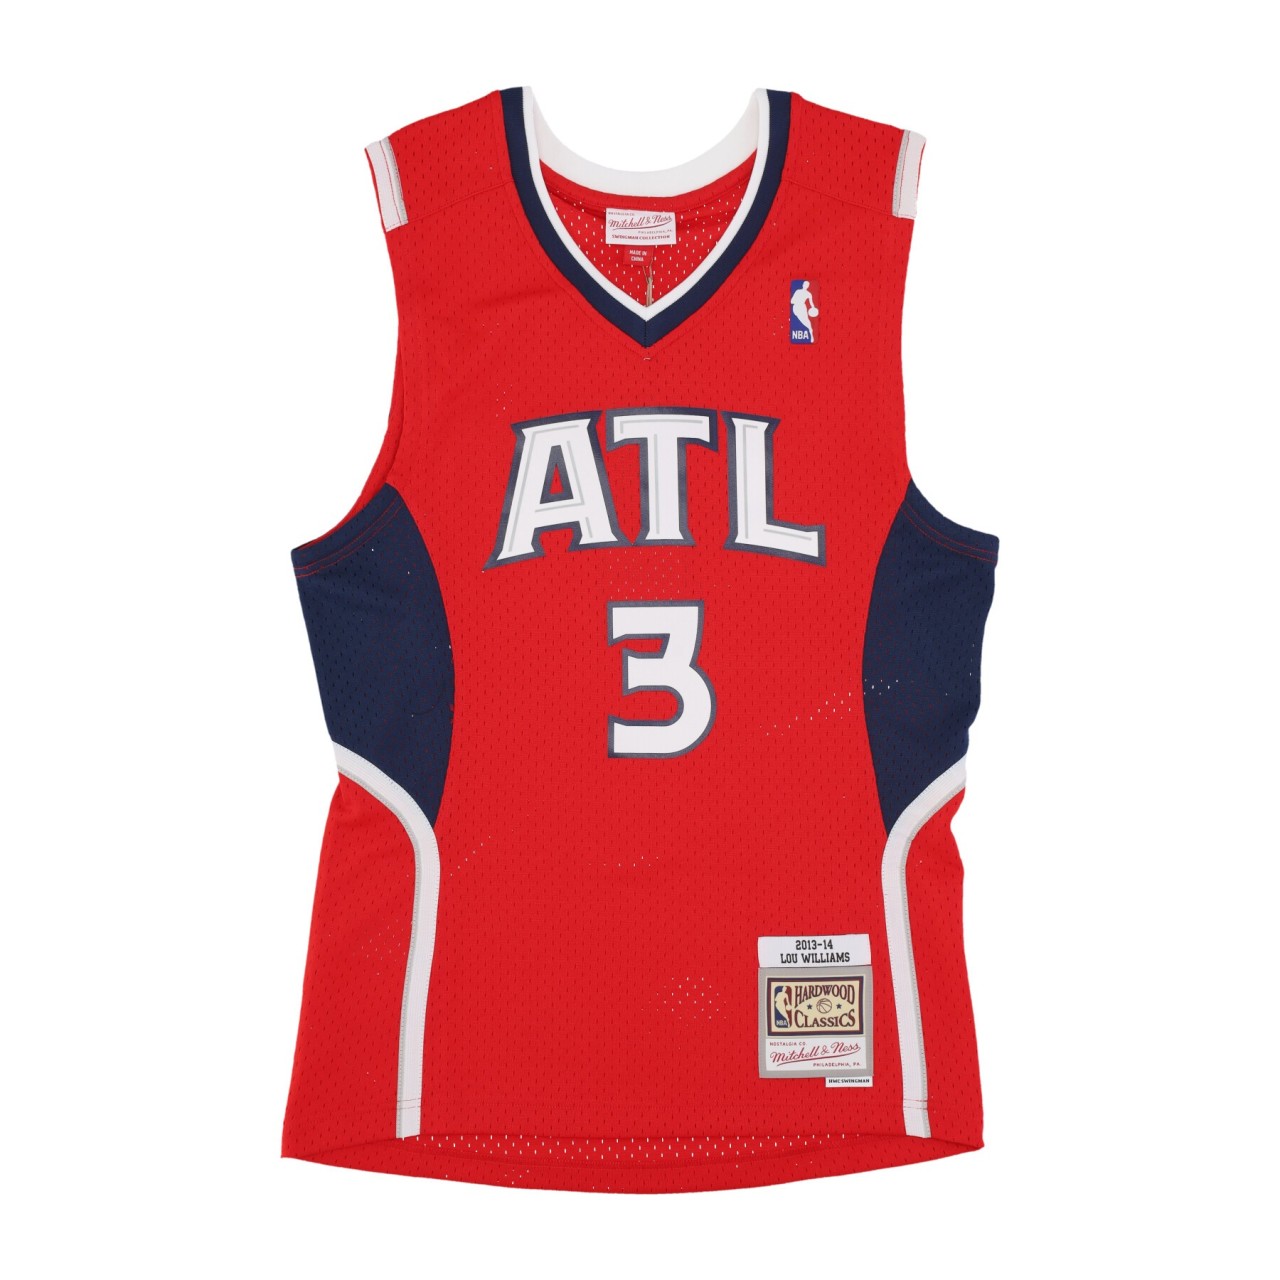 MITCHELL & NESS NBA AUTHENTIC JERSEY NO 3 LOU WILLIAMS 2013 ATLHAW SMJY5662-AHA13LWMRED1